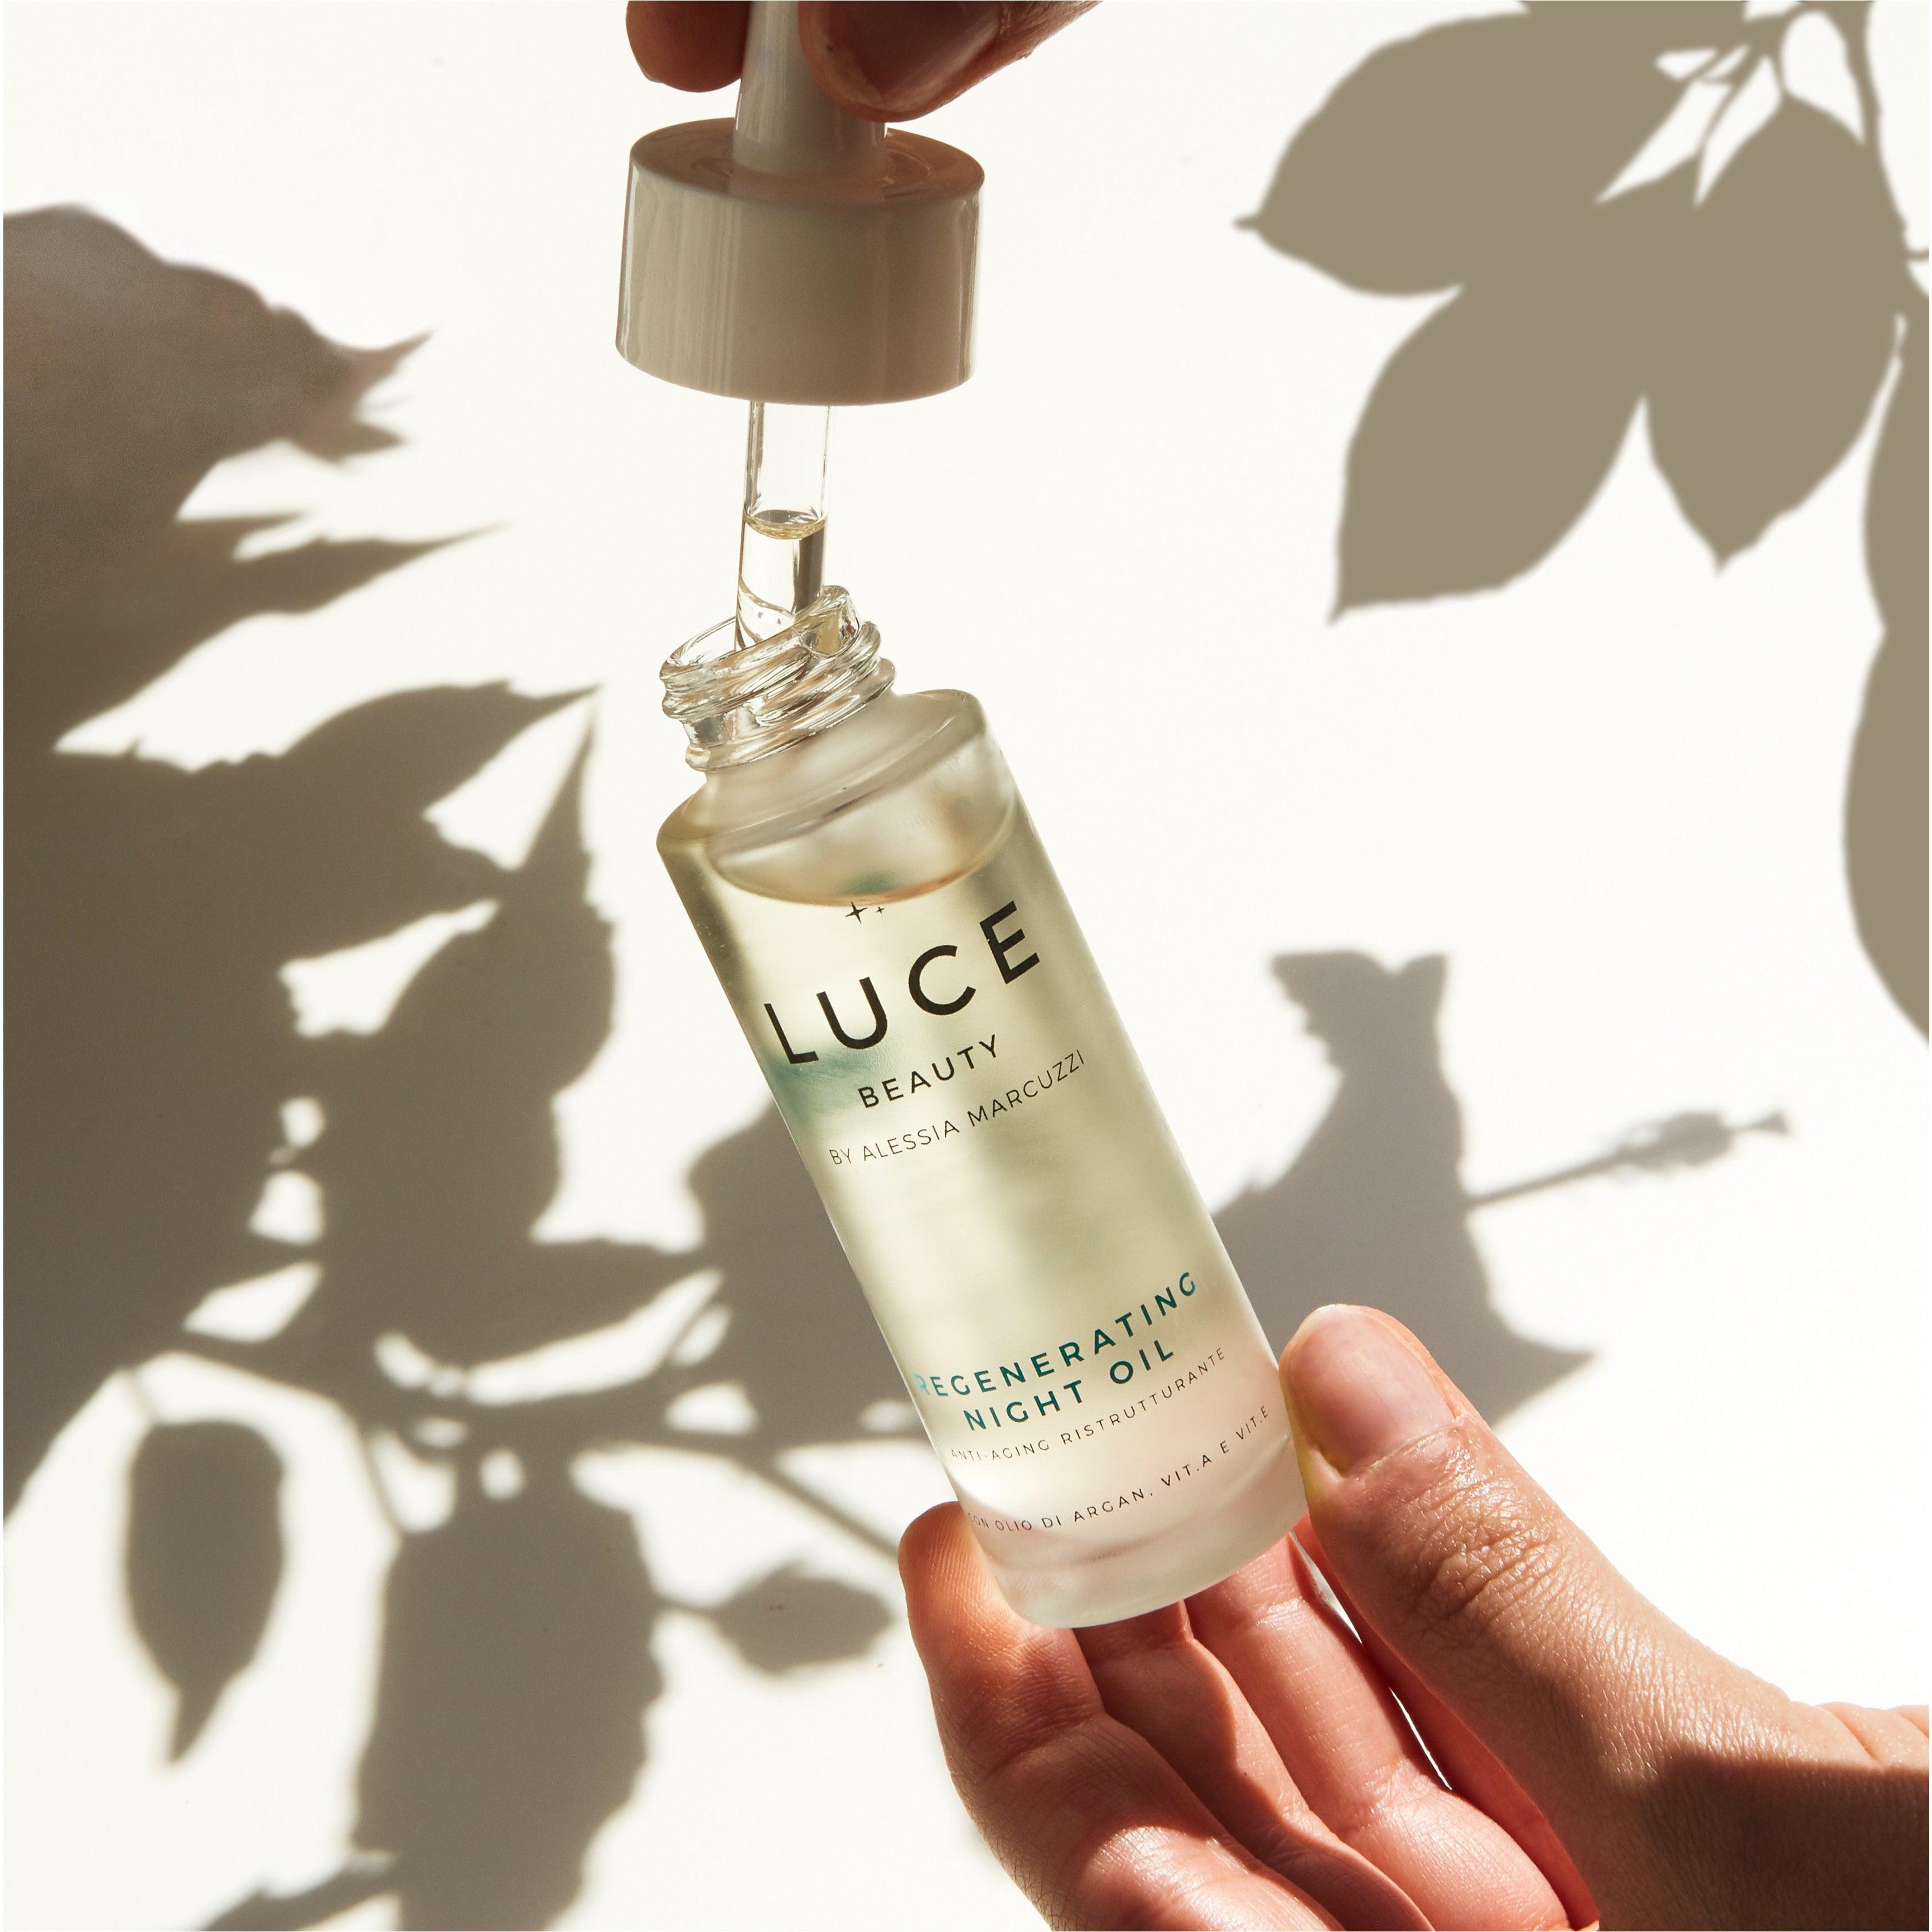 Regenerating Night Oil - Ombre - Luce Beauty by Alessia Marcuzzi